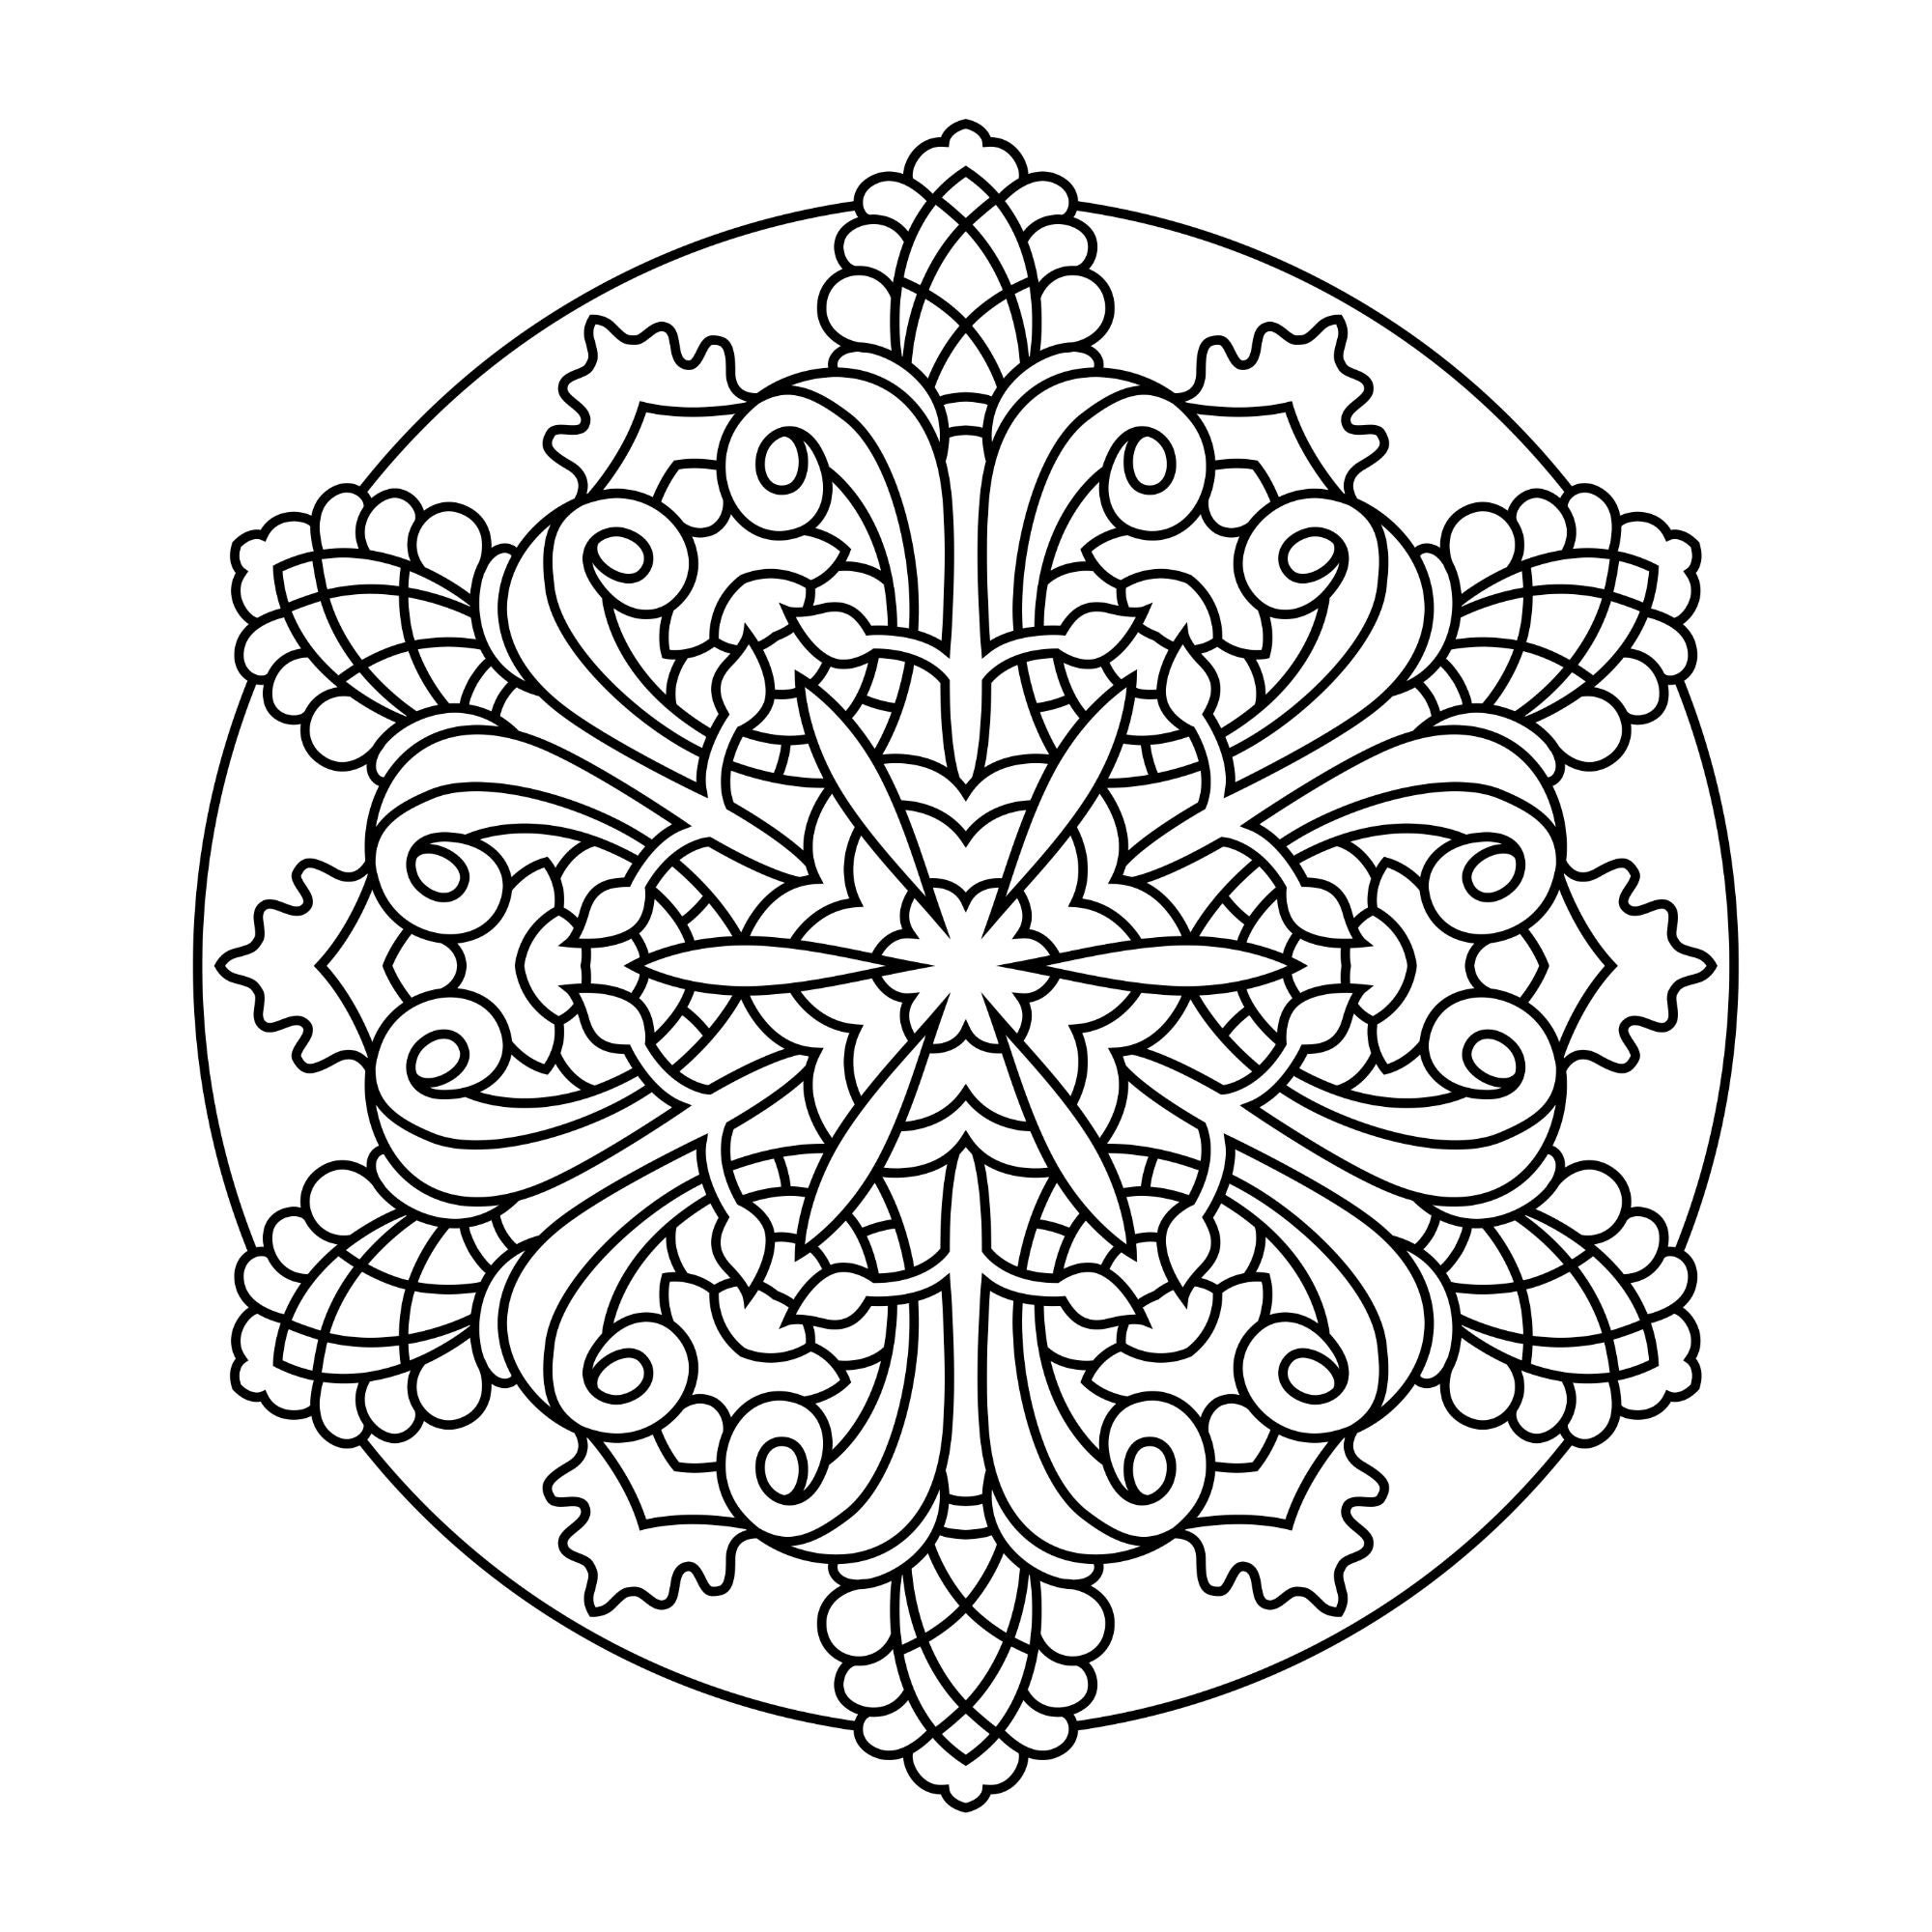 1001 Mandala Coloring Pages Stress relieving pages for kids | Etsy